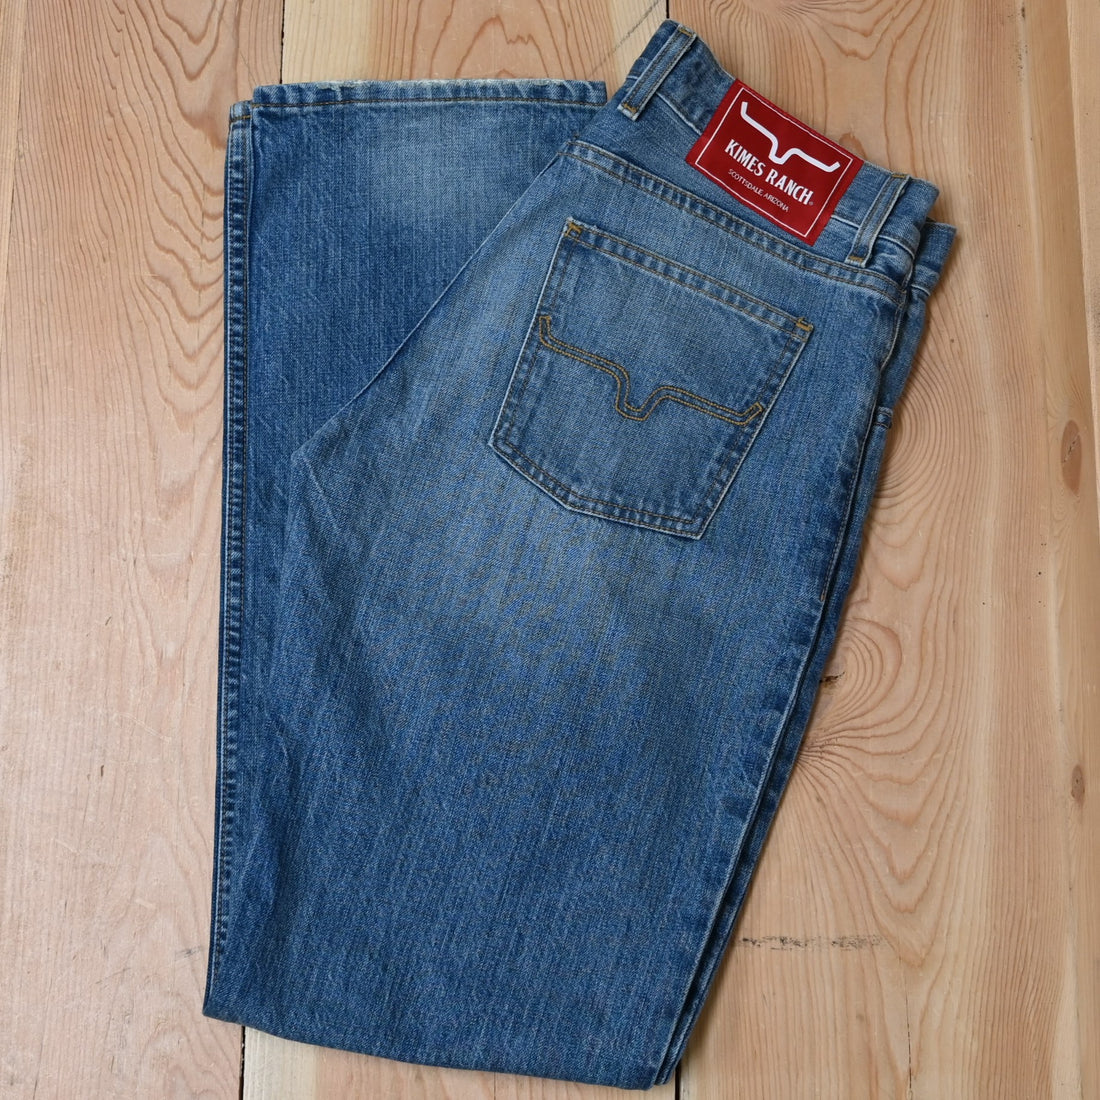 Kimes Brooks Jeans Mid Wash view of pocket and pant leg